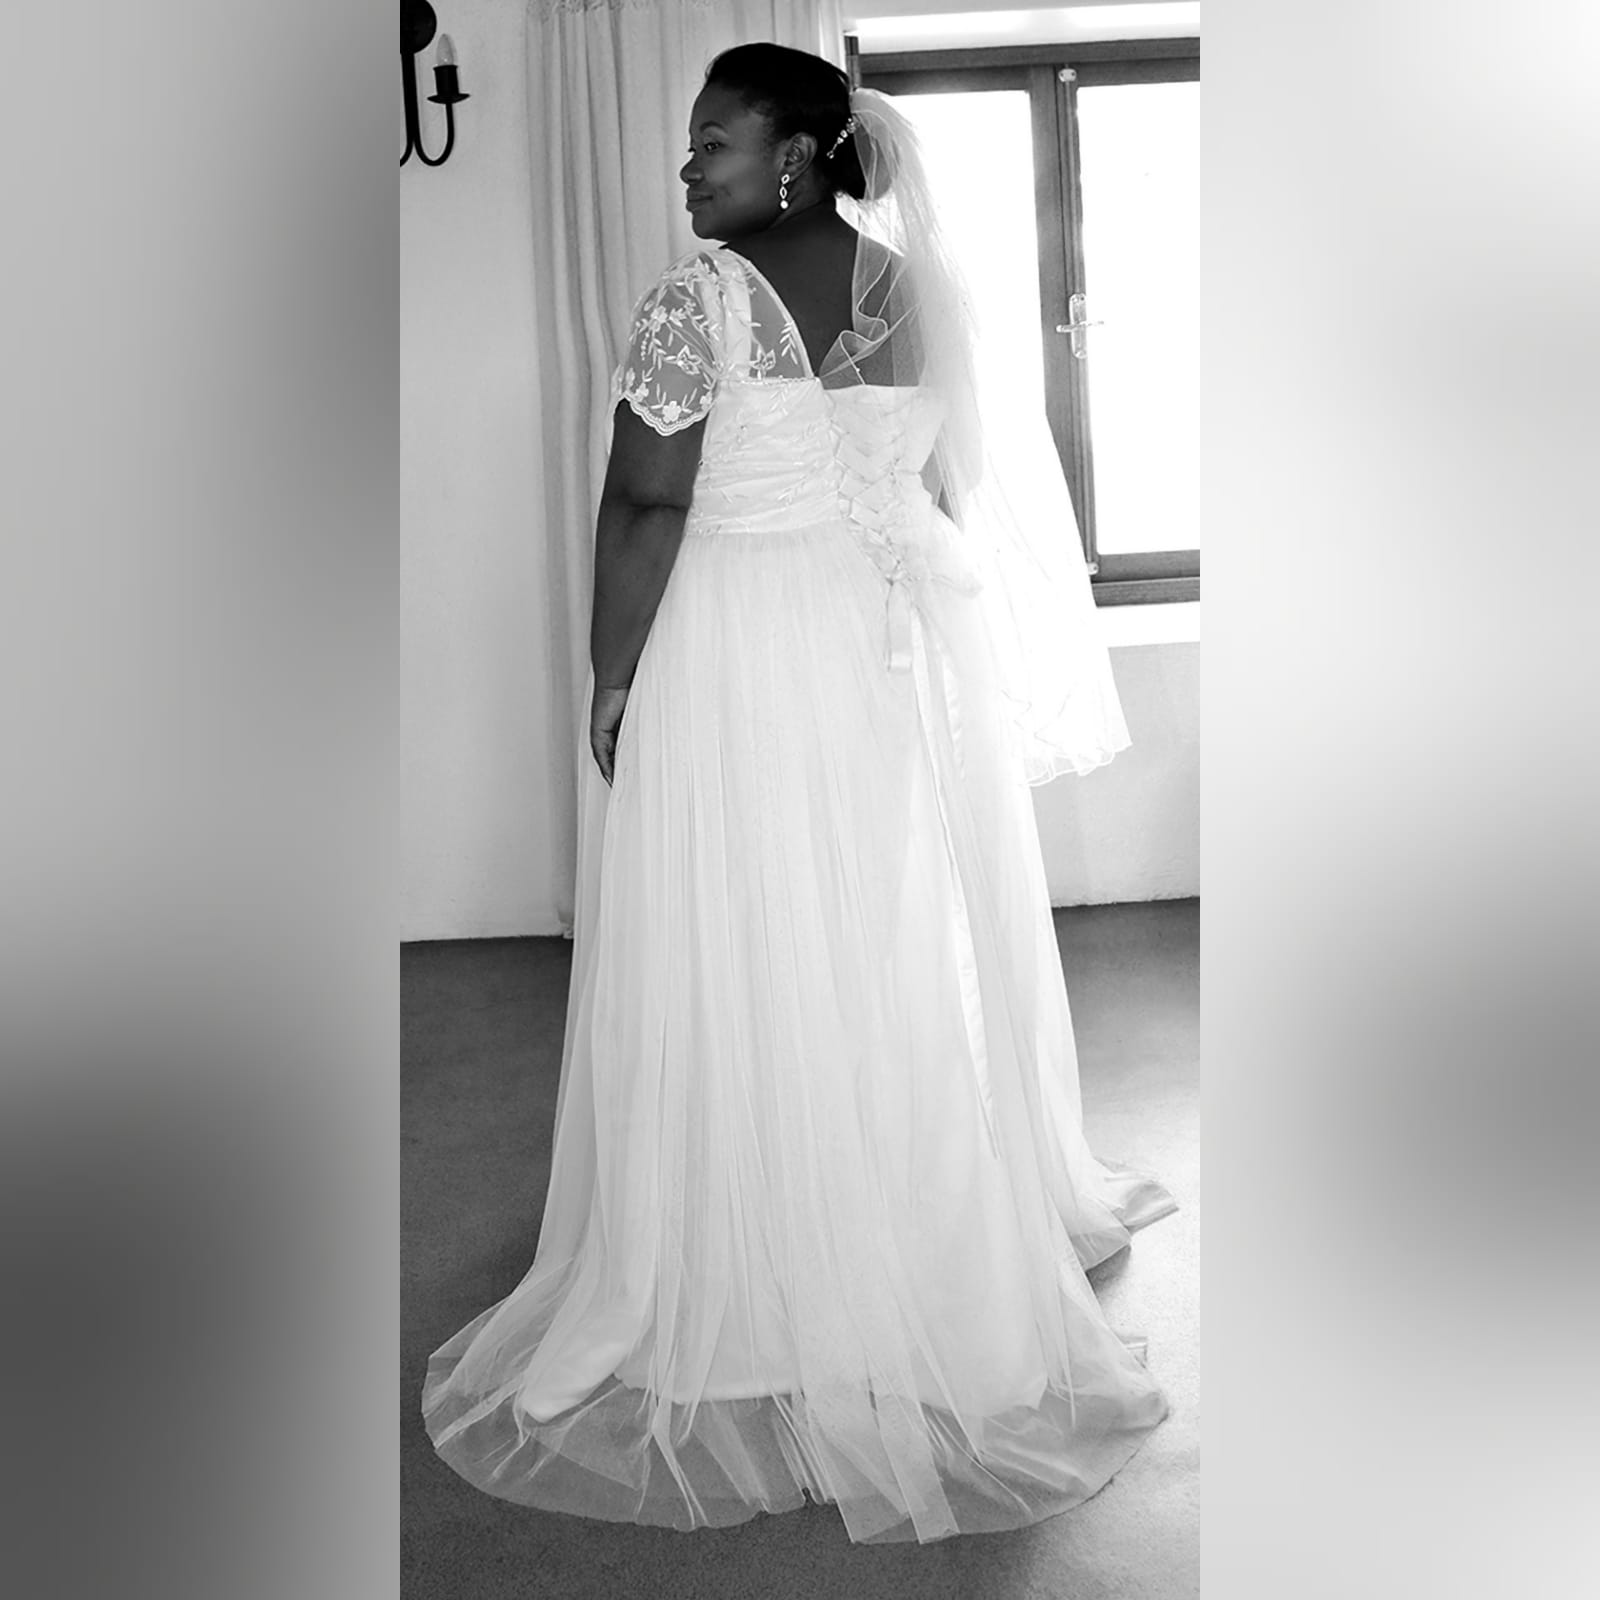 Plus size white tulle and lace wedding dress 1 white tulle and lace wedding dress. Bodice in lace with short sleeves and a lace up back. With a touch of silver beads.